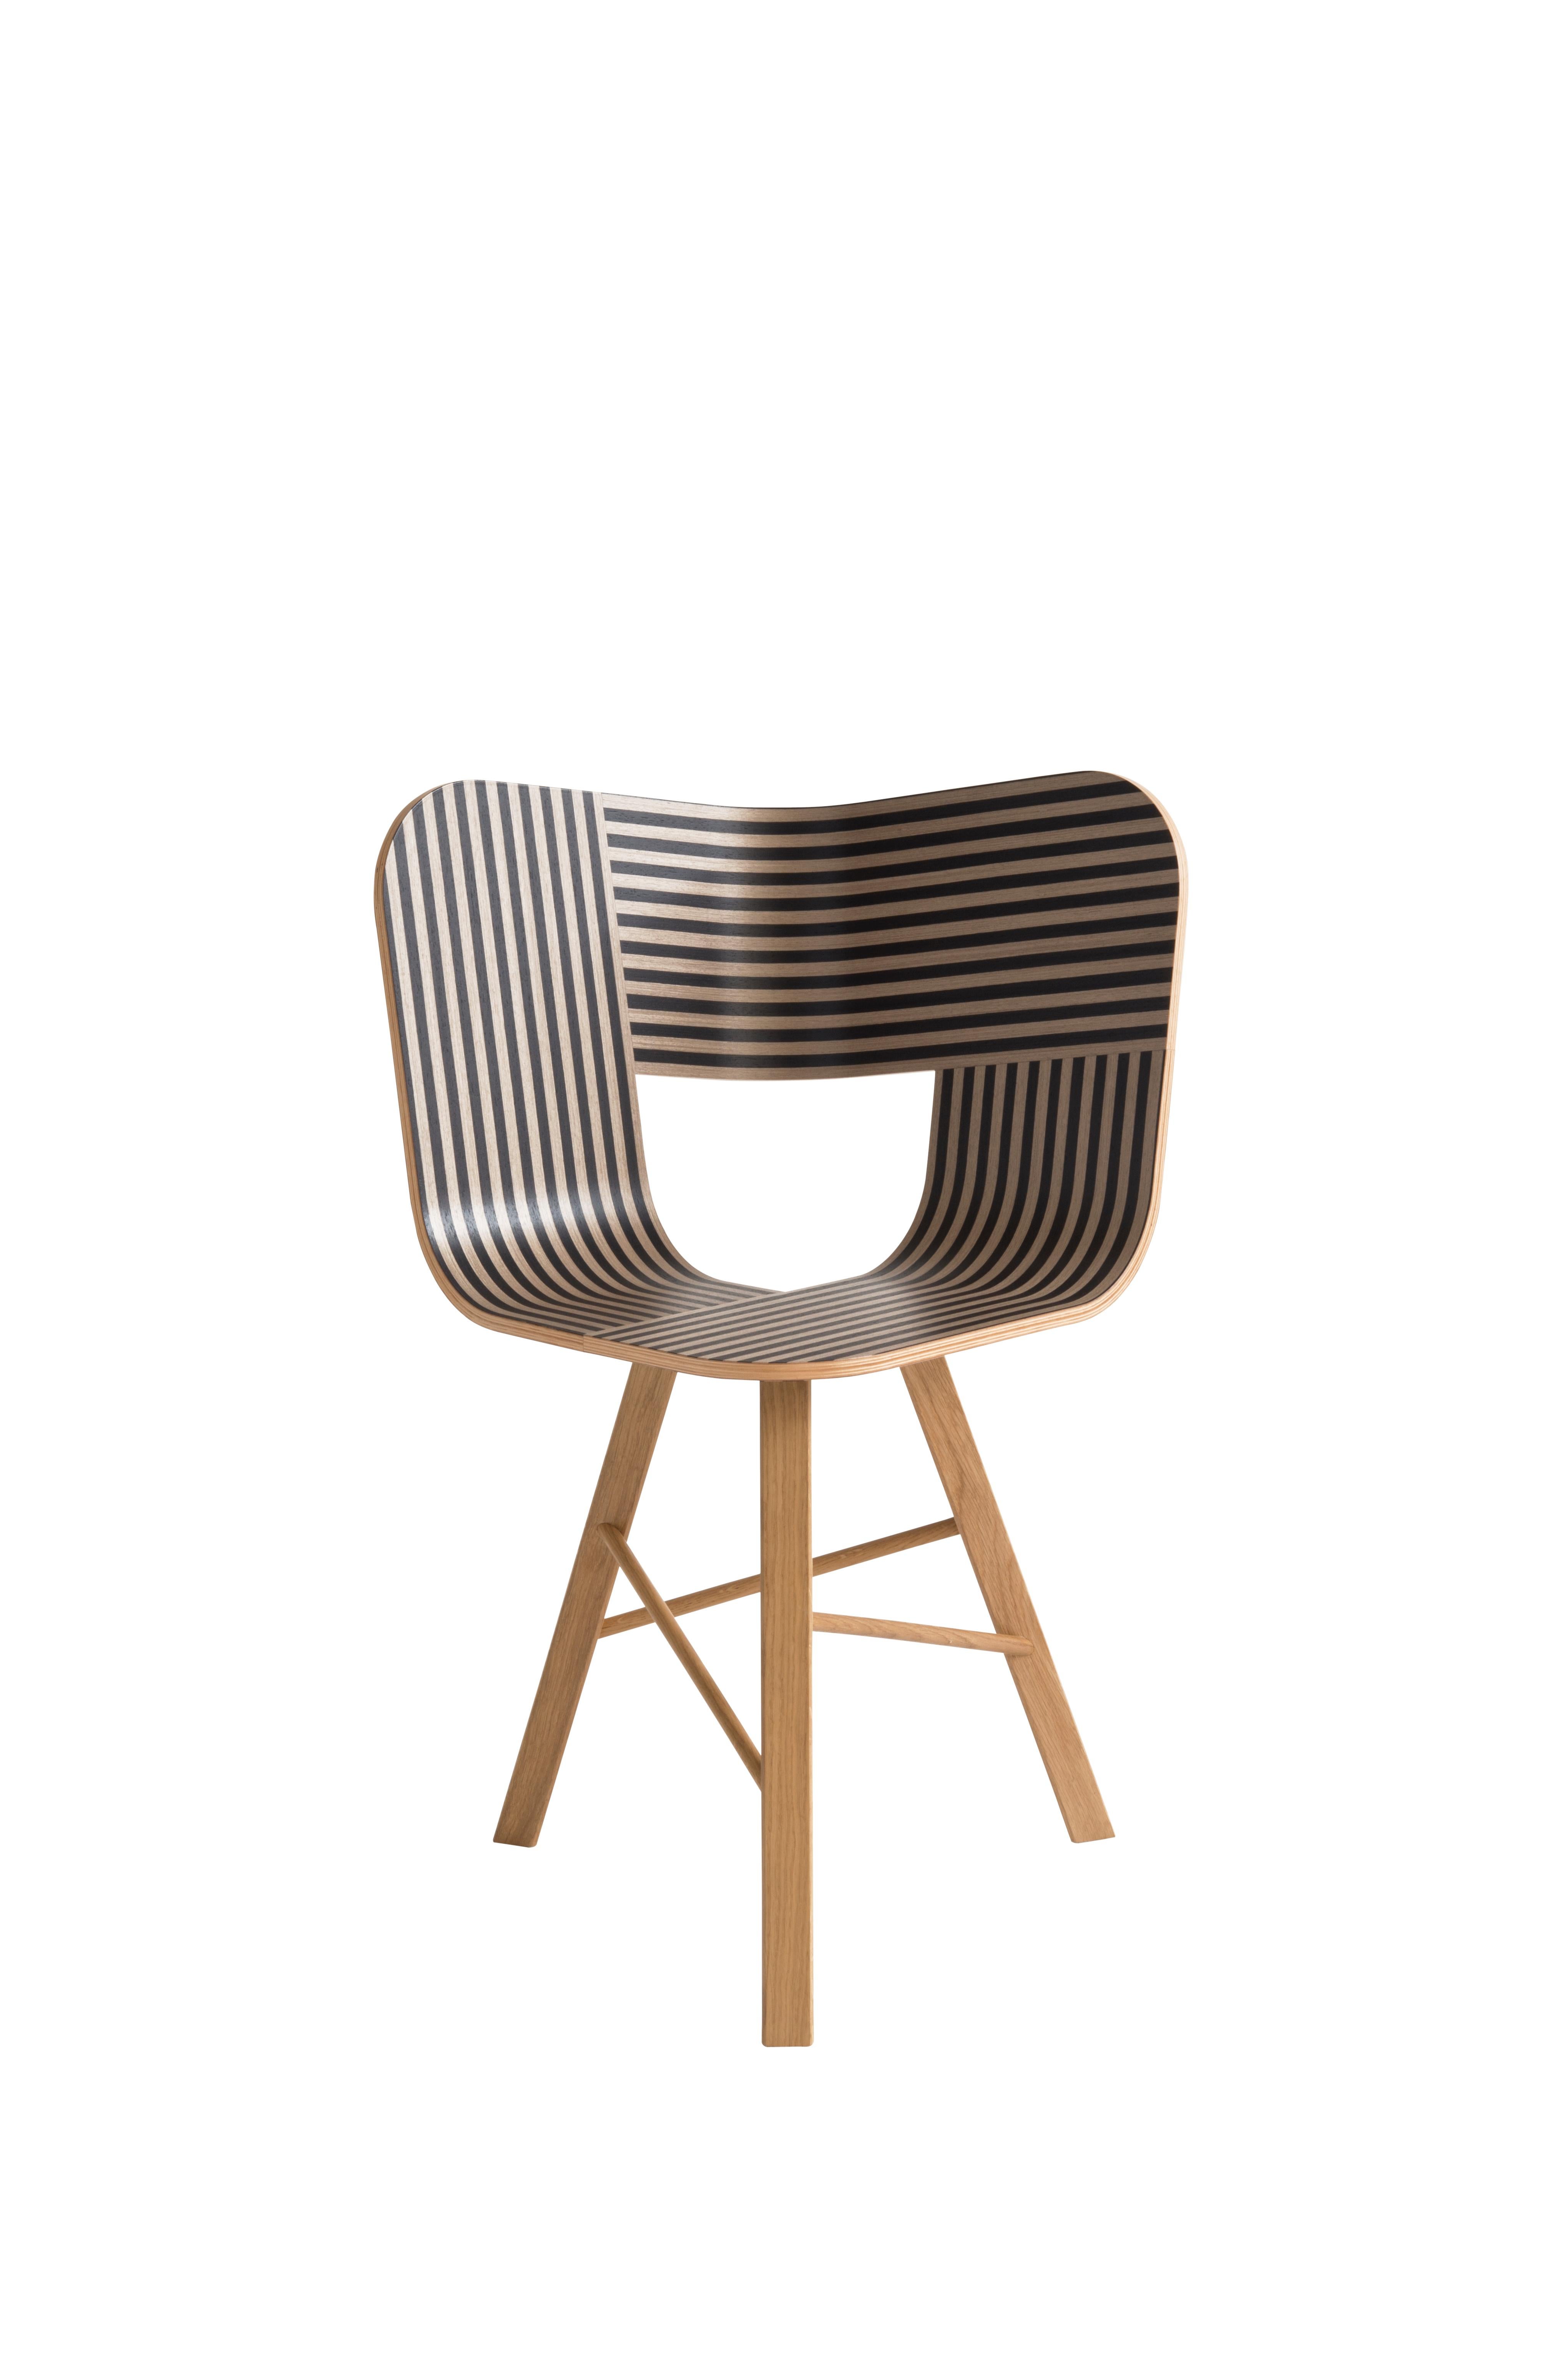 Tria wood 3 legs chair, striped seat ivory and black - solid oak wood structure by Colé Italia with Lorenz & Kaz
Dimensions: H 82.5, D 52, W 61 cm
Materials: plywood chair; 3 legs solid oak base

Also available: tria; 4 legs, with cussion,